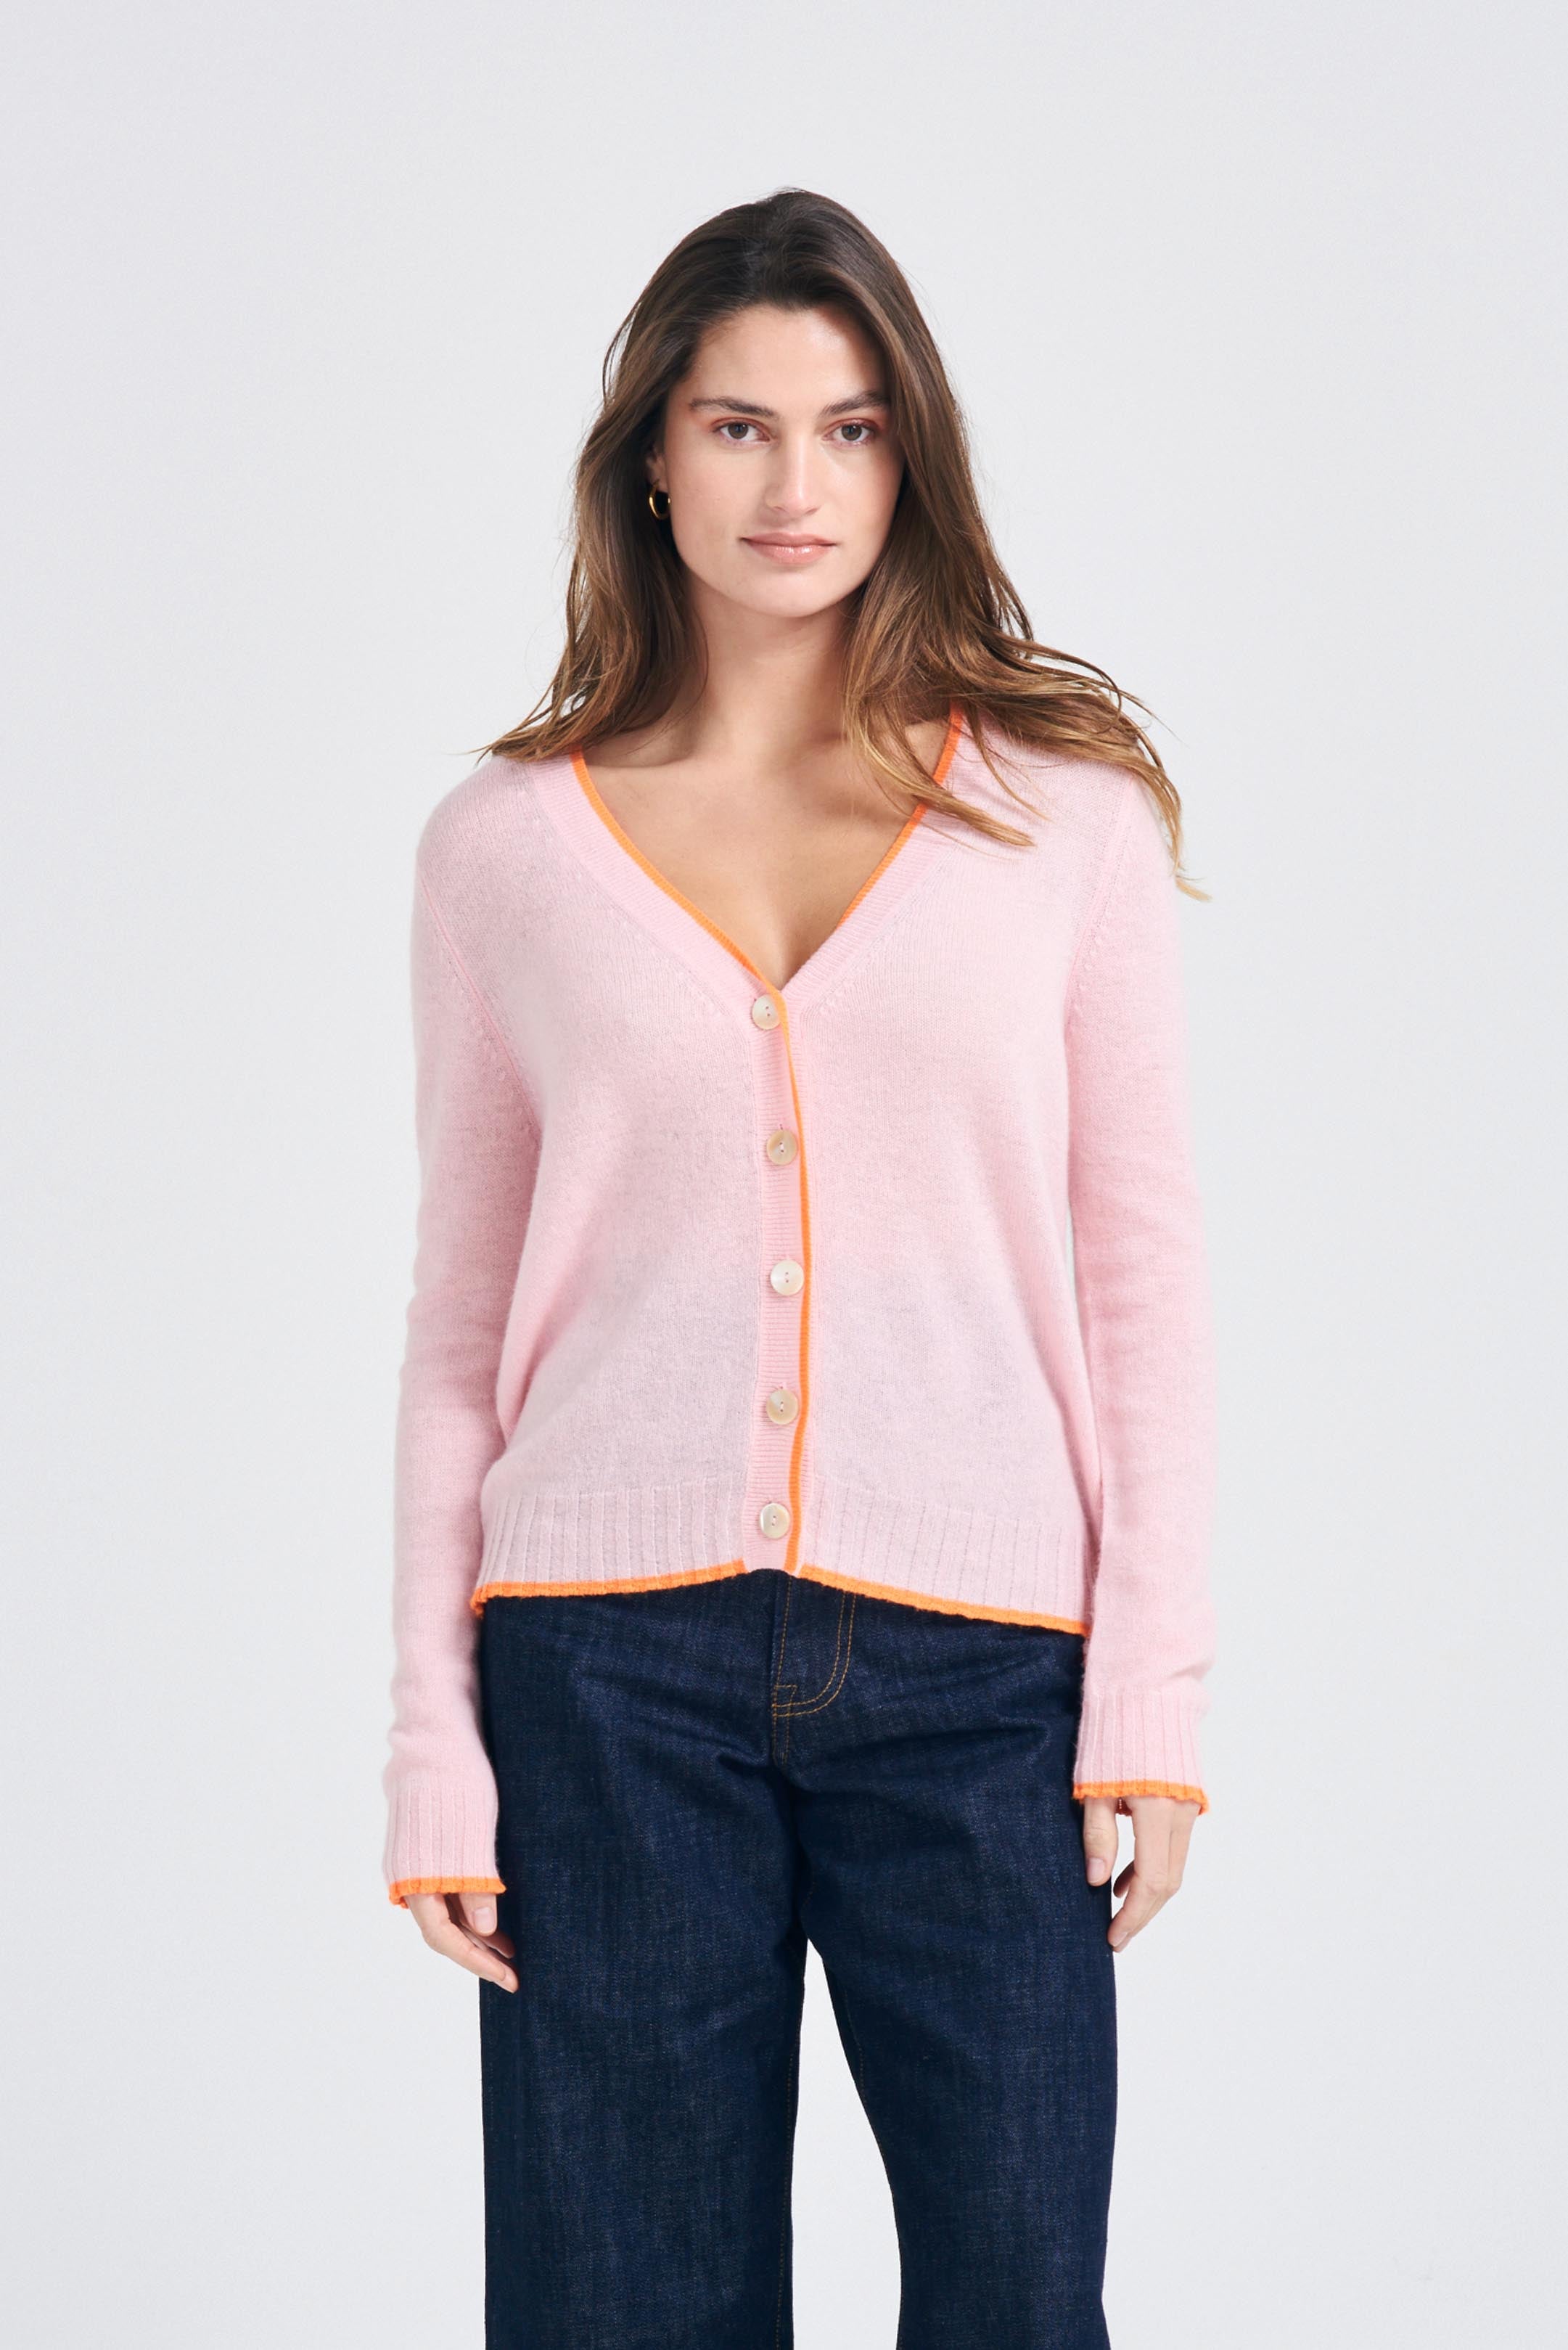 Brown haired female model wearing Jumper1234 Pale pink cashmere vee neck cardigan with neon orange tipping